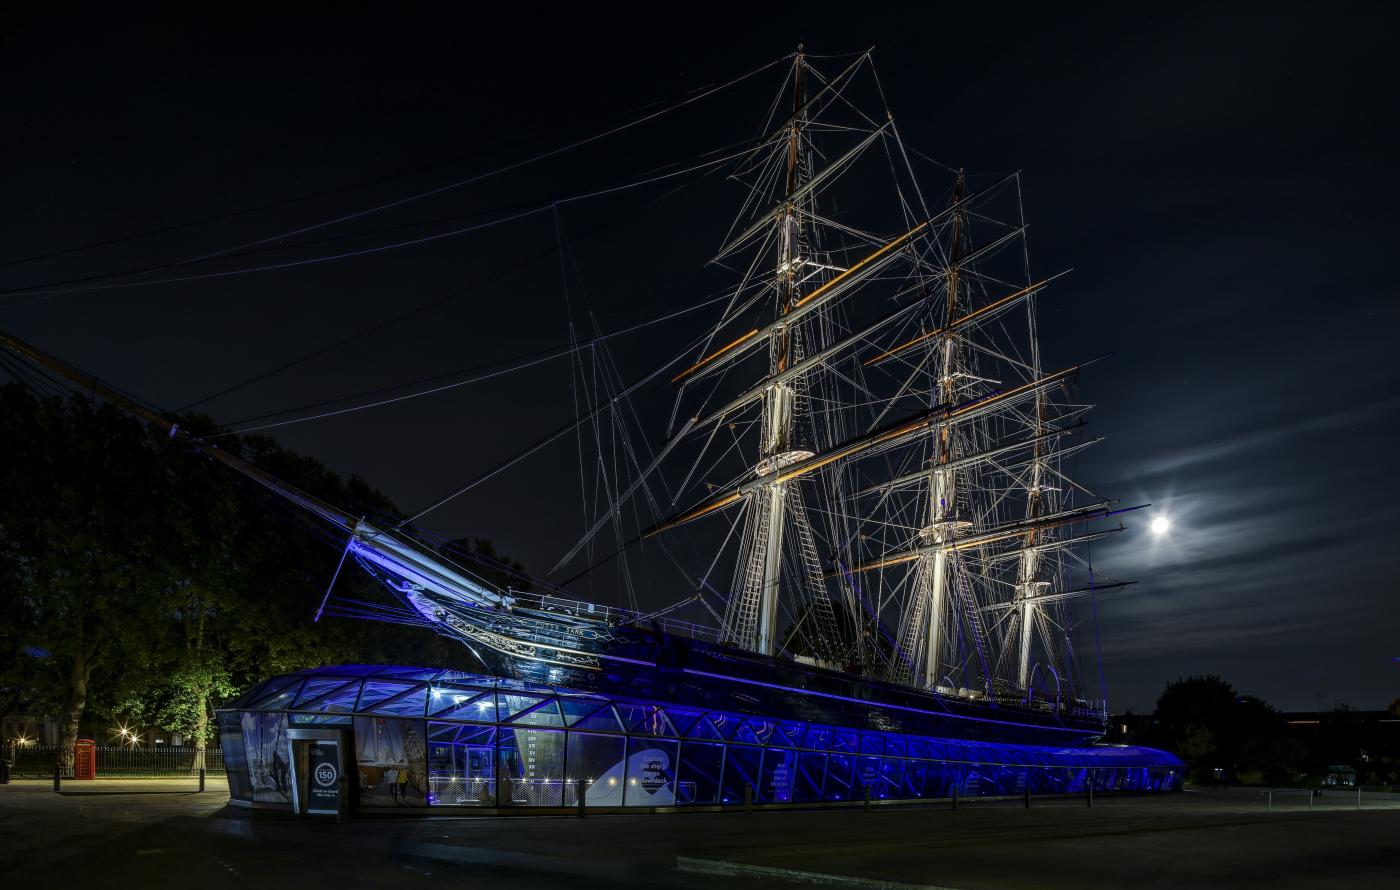 An image showing 'Cutty Sark illuminated in blue'